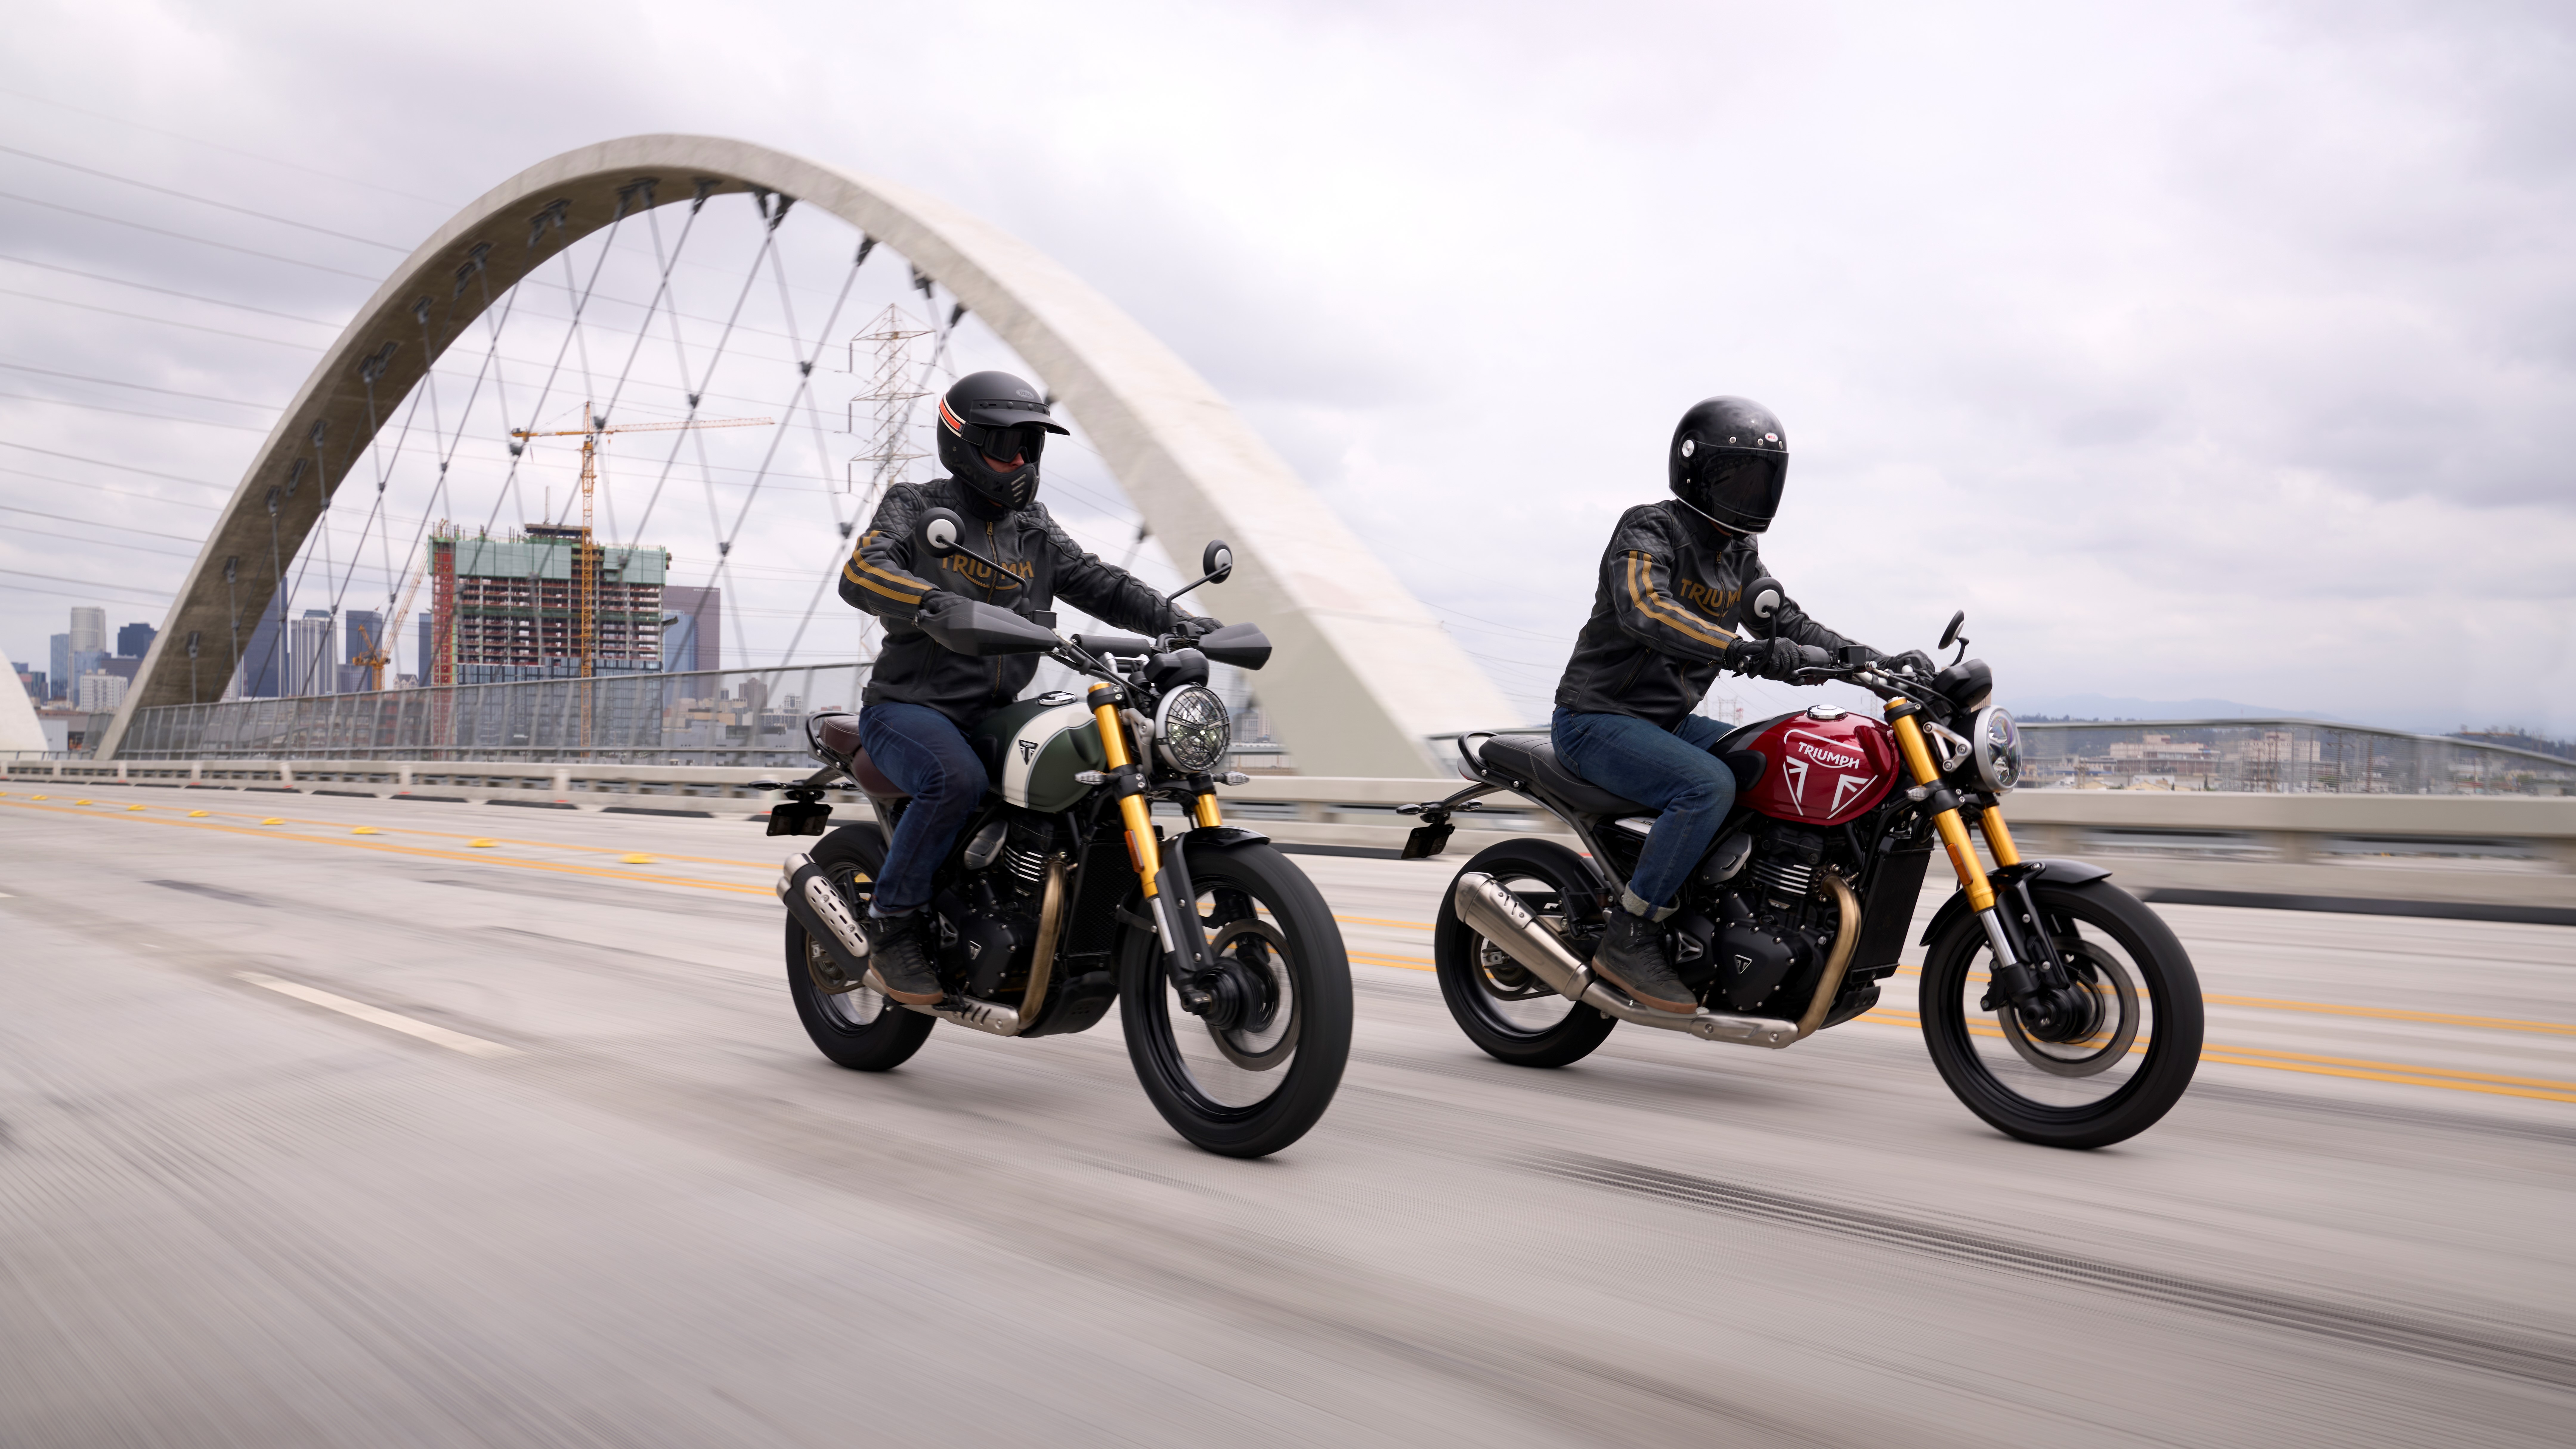 Two riders on Triumph motorcycles, with a Triumph Speed 400 and a Triumph Scrambler 400 X, cruising on a highway with an arch bridge in the background, suitable for an HD desktop wallpaper and background.